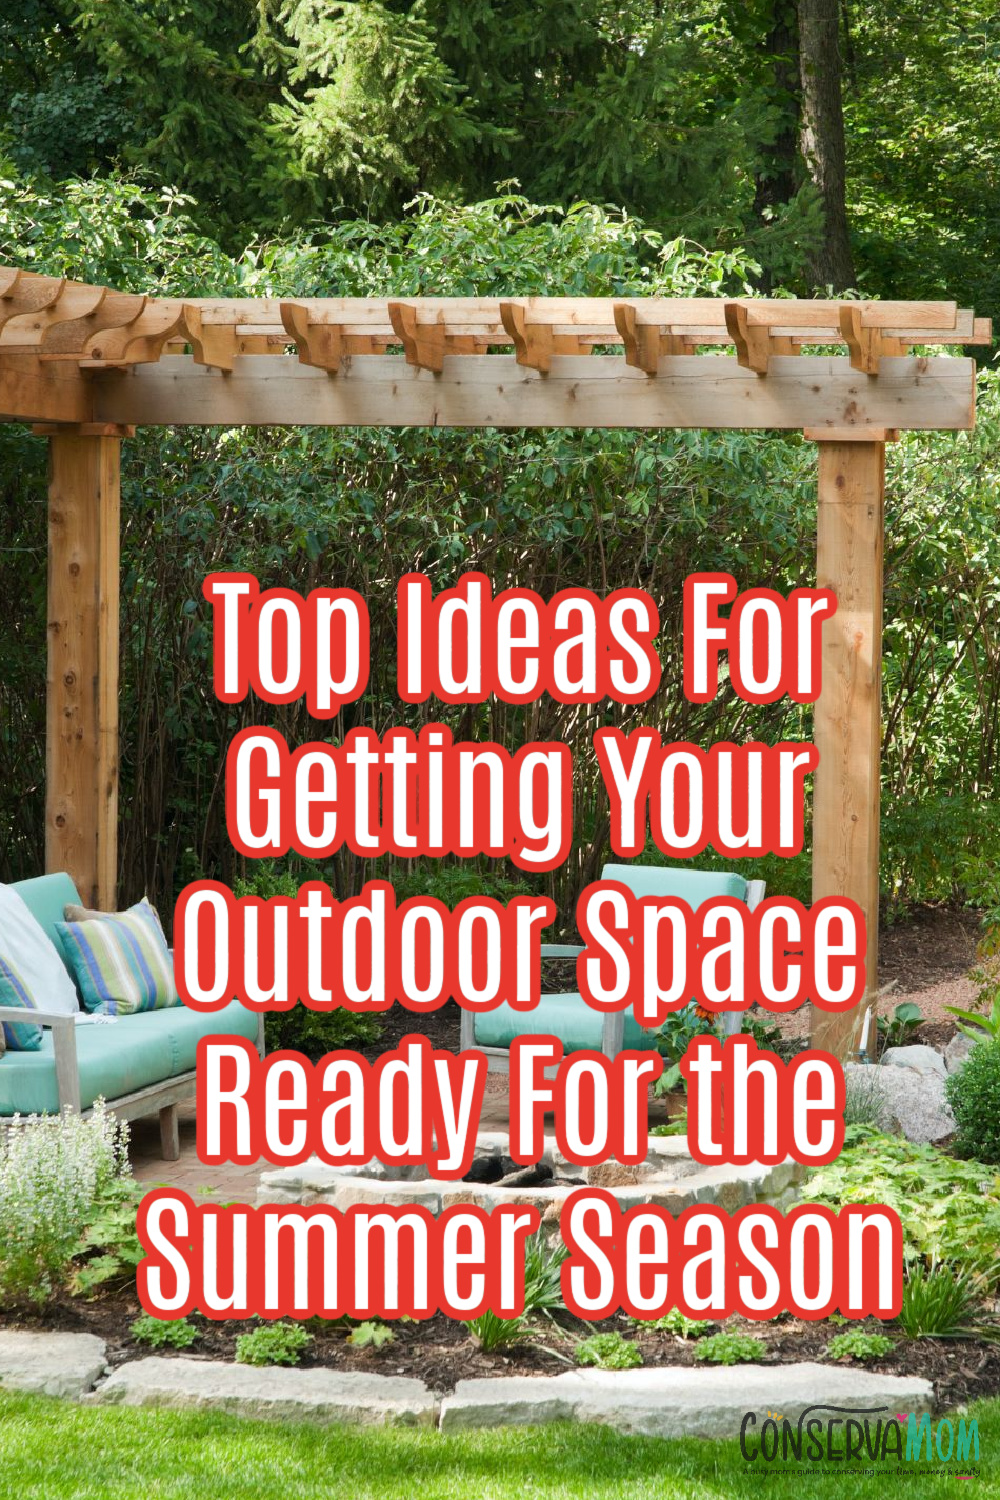 Top Ideas For Getting Your Outdoor Space Ready For the Summer Season